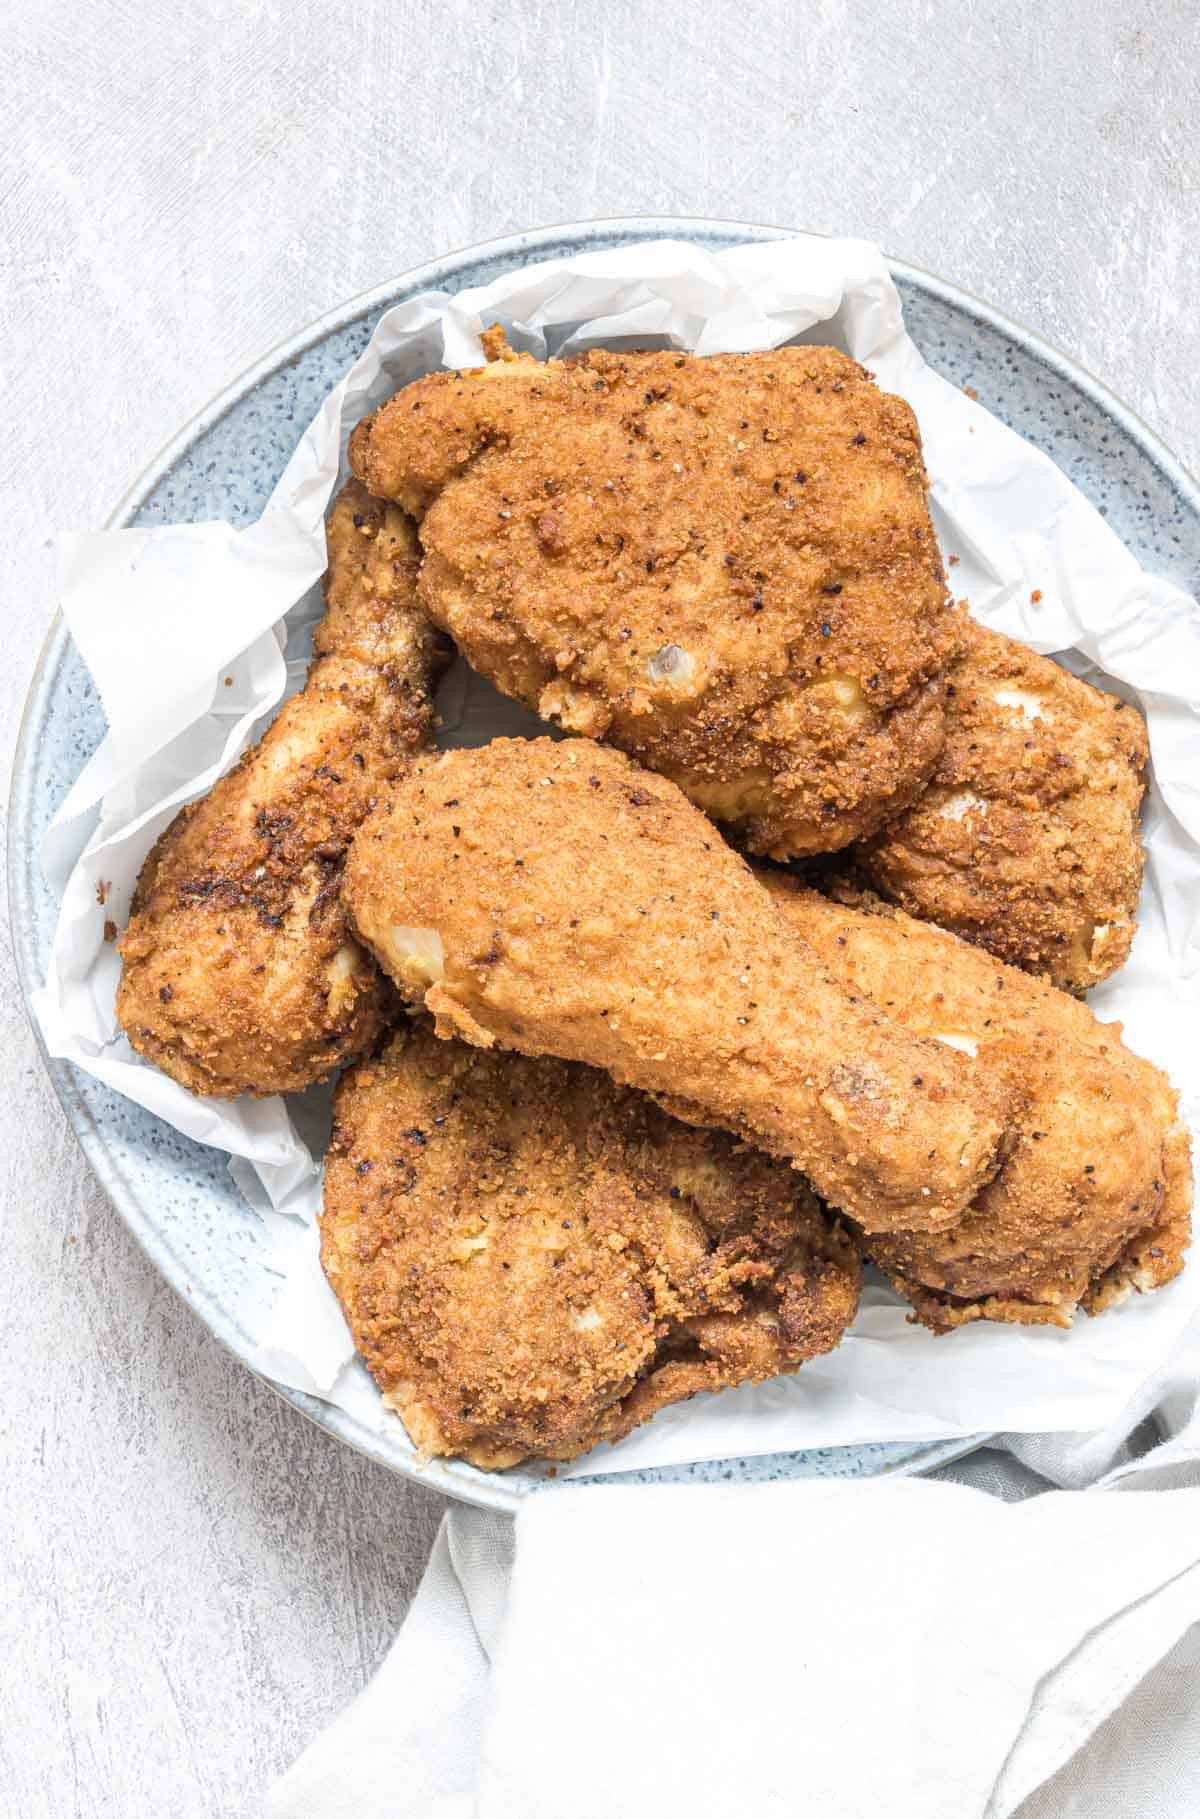 How To Reheat Fried Chicken In Air Fryer?  